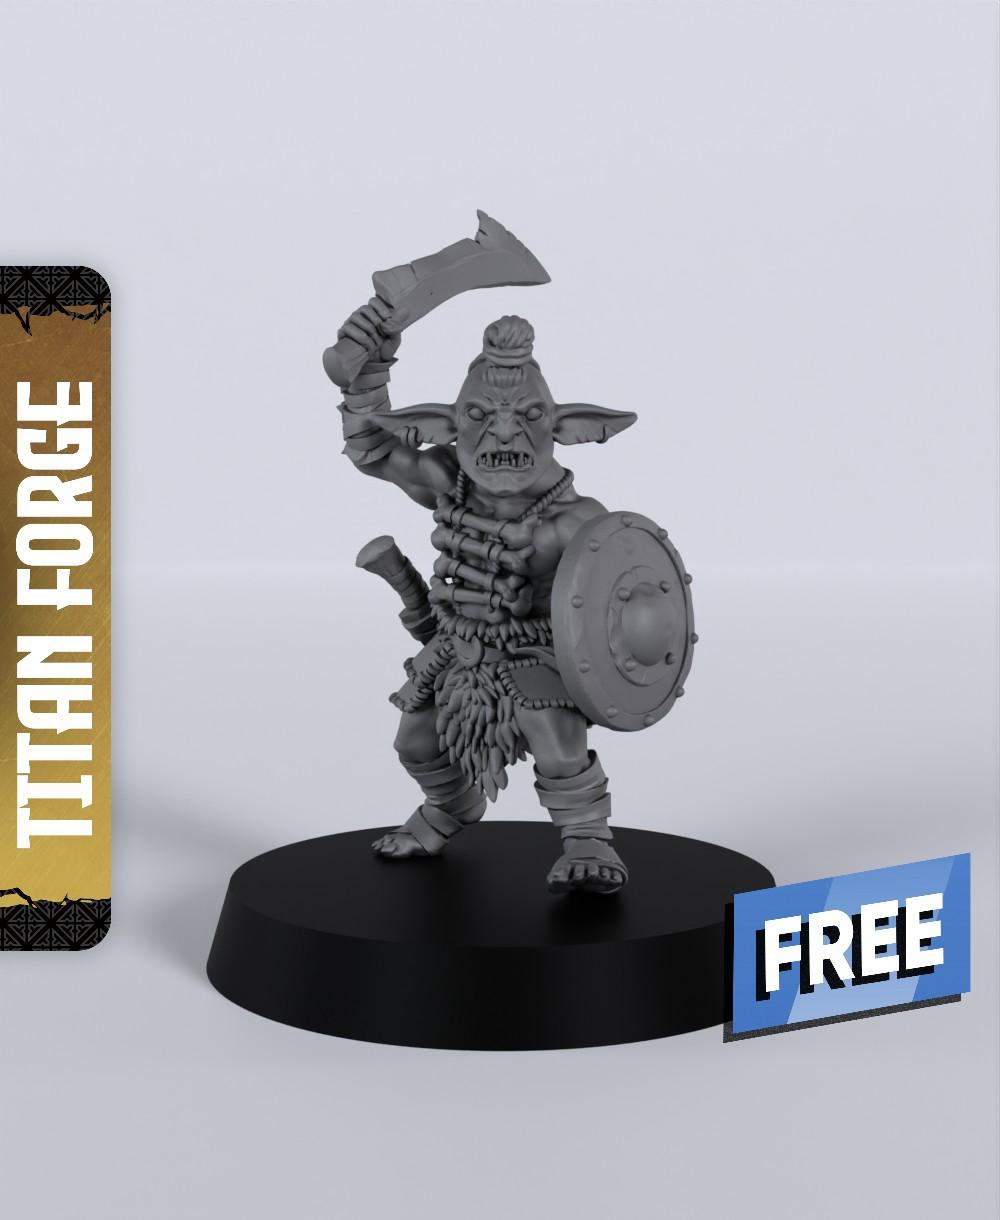 Goblin Fighter - With Free Dragon Warhammer - 5e DnD Inspired for RPG and Wargamers 3d model